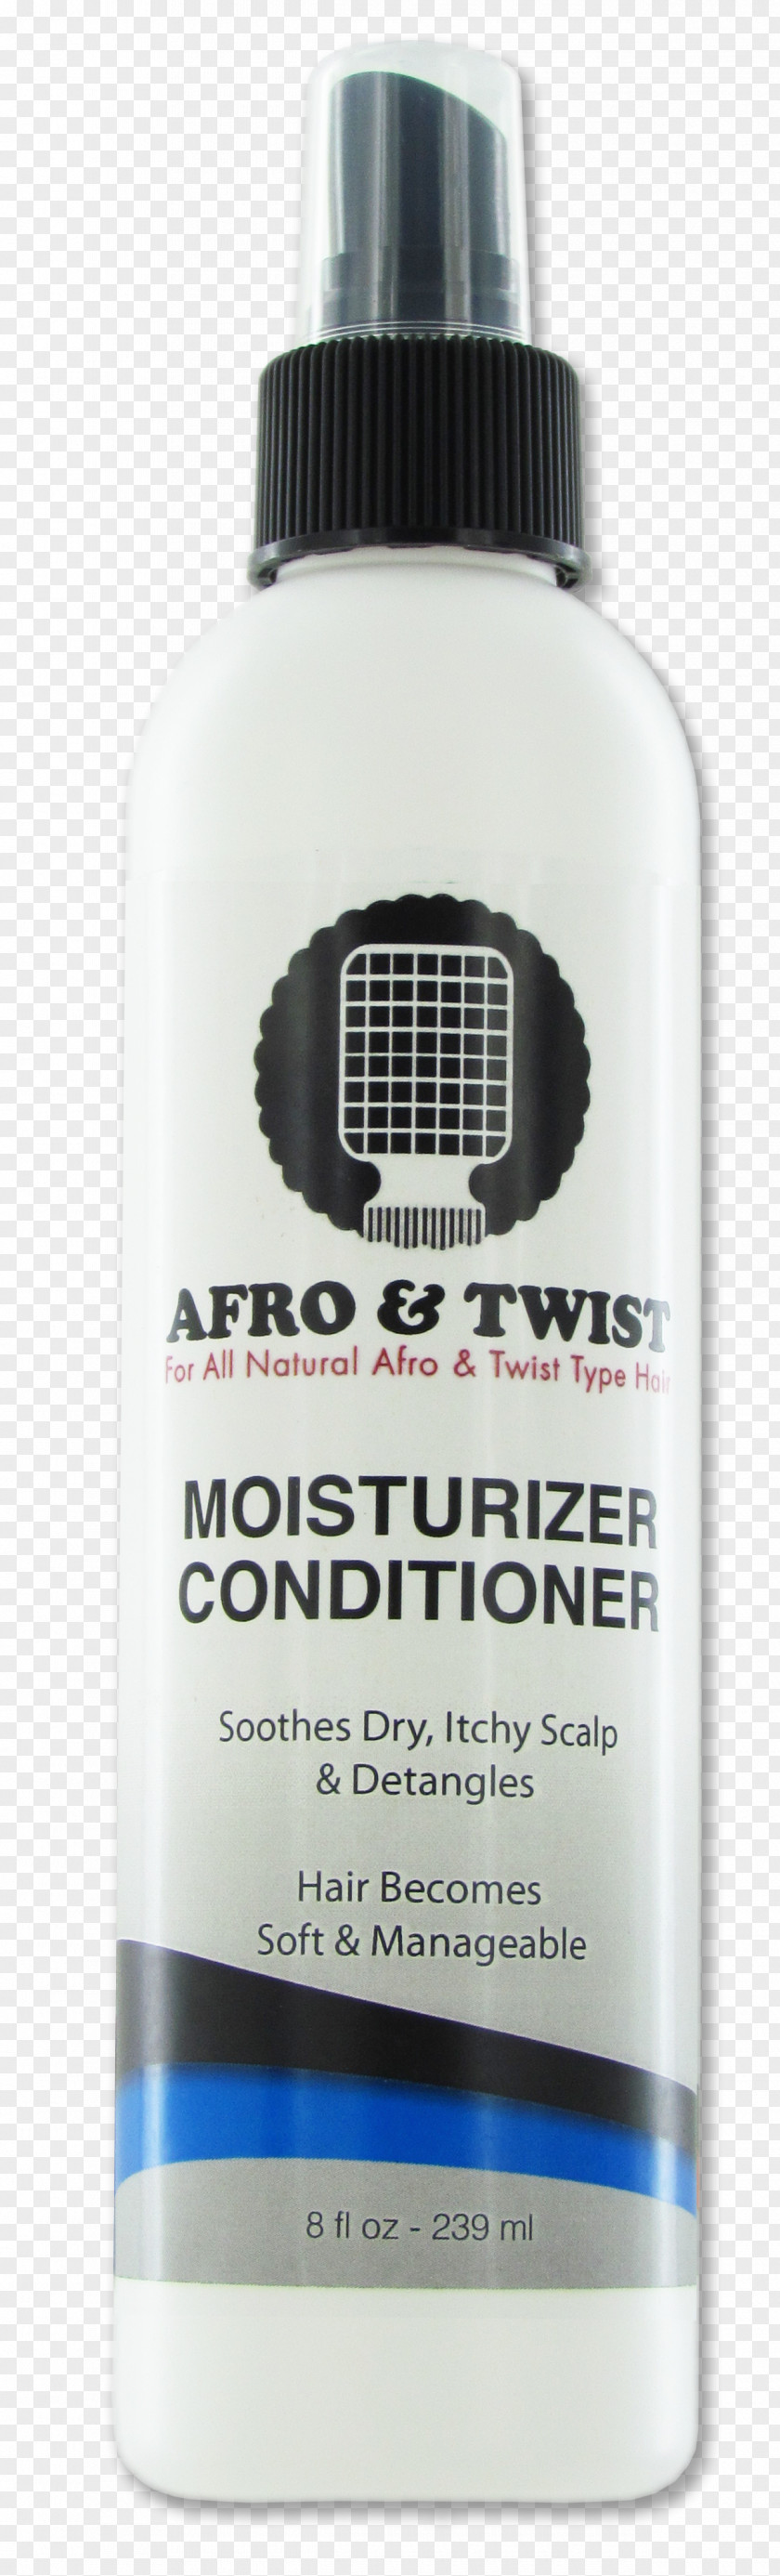 Hair Lotion Moisturizer Comb Afro Twists PNG